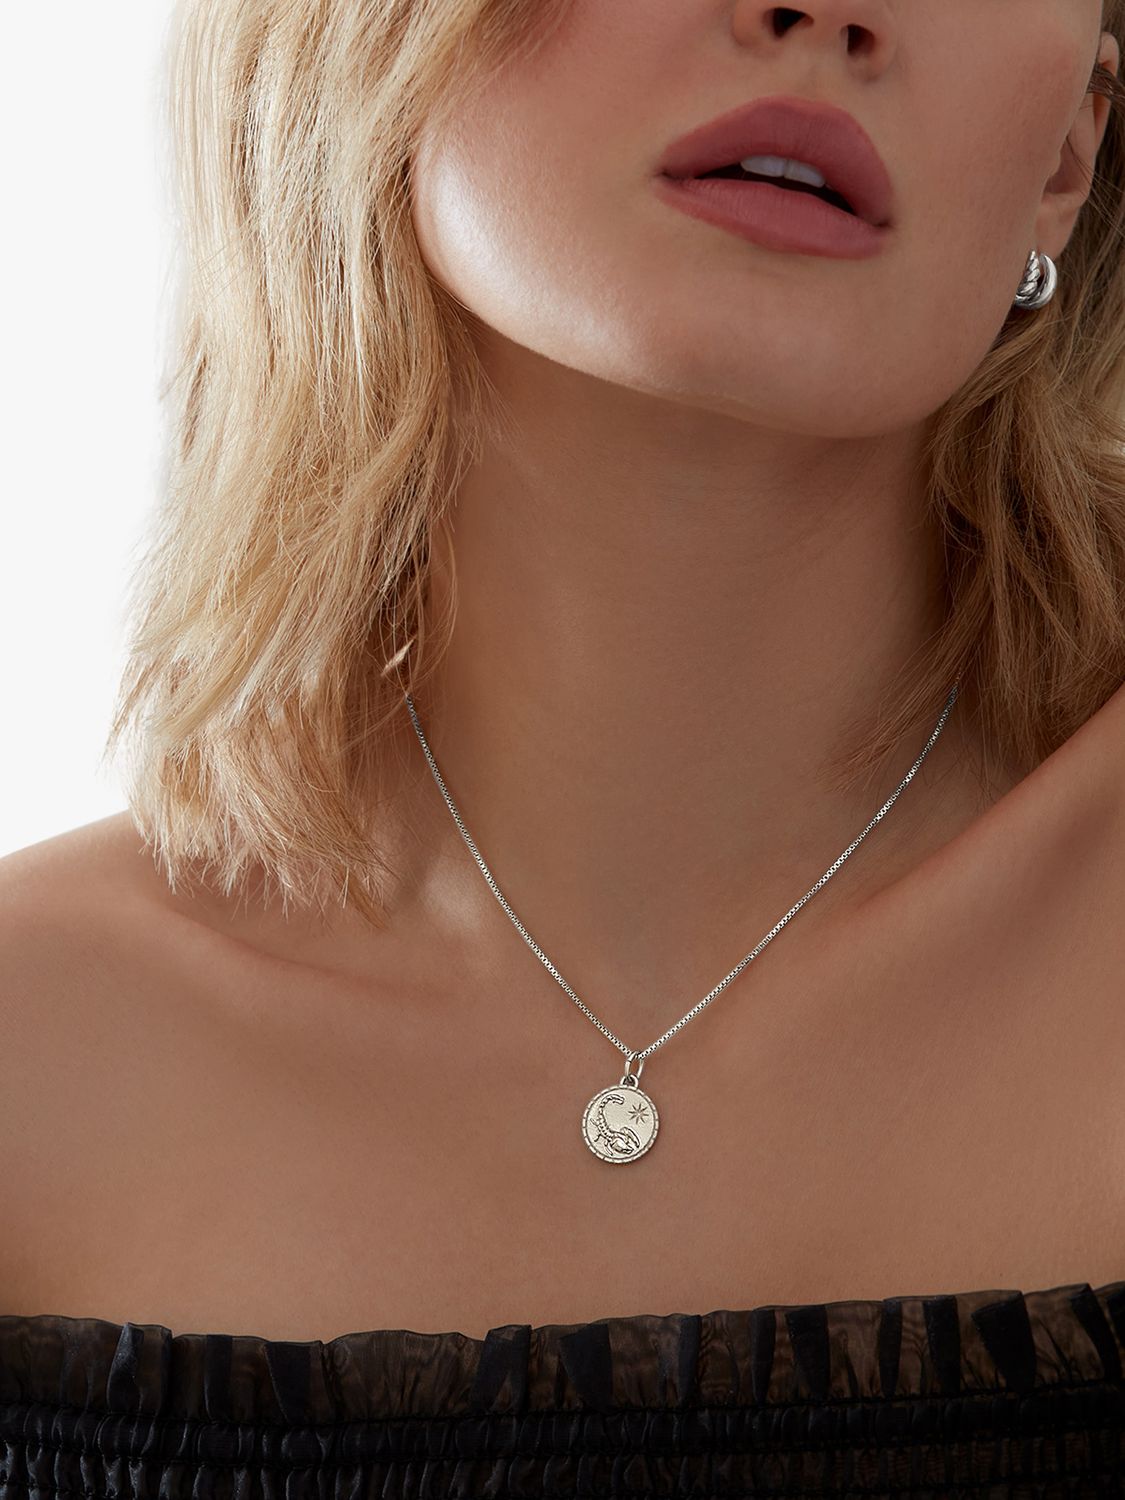 Buy Rachel Jackson London Personalised Zodiac Art Coin Necklace, Silver Online at johnlewis.com